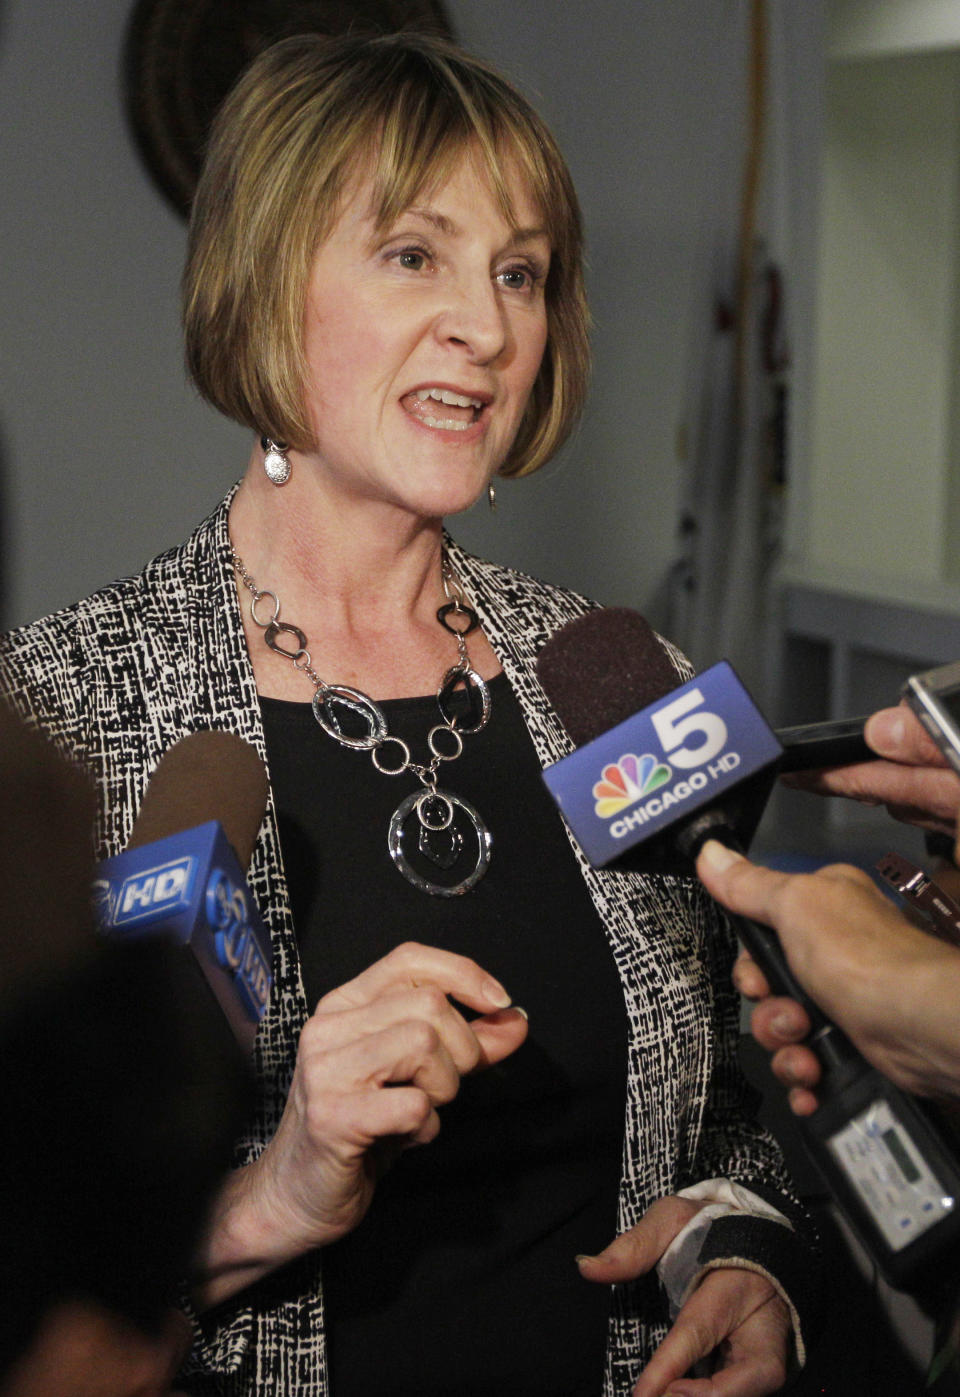 Illinois Senate Minority Leader Christine Radogno speaks with reporters after top Illinois lawmakers met with Gov. Pat Quinn in Chicago, Wednesday, June 6, 2012, to talk about pension reform. The lawmakers left the meeting divided over what approach to take. They were close to agreement last week, but that was derailed shortly before the end of the legislative session. The biggest dispute is over whether to make downstate and suburban Chicago schools take over the cost of employee pensions. Illinois pays those expenses now. (AP Photo/M. Spencer Green)